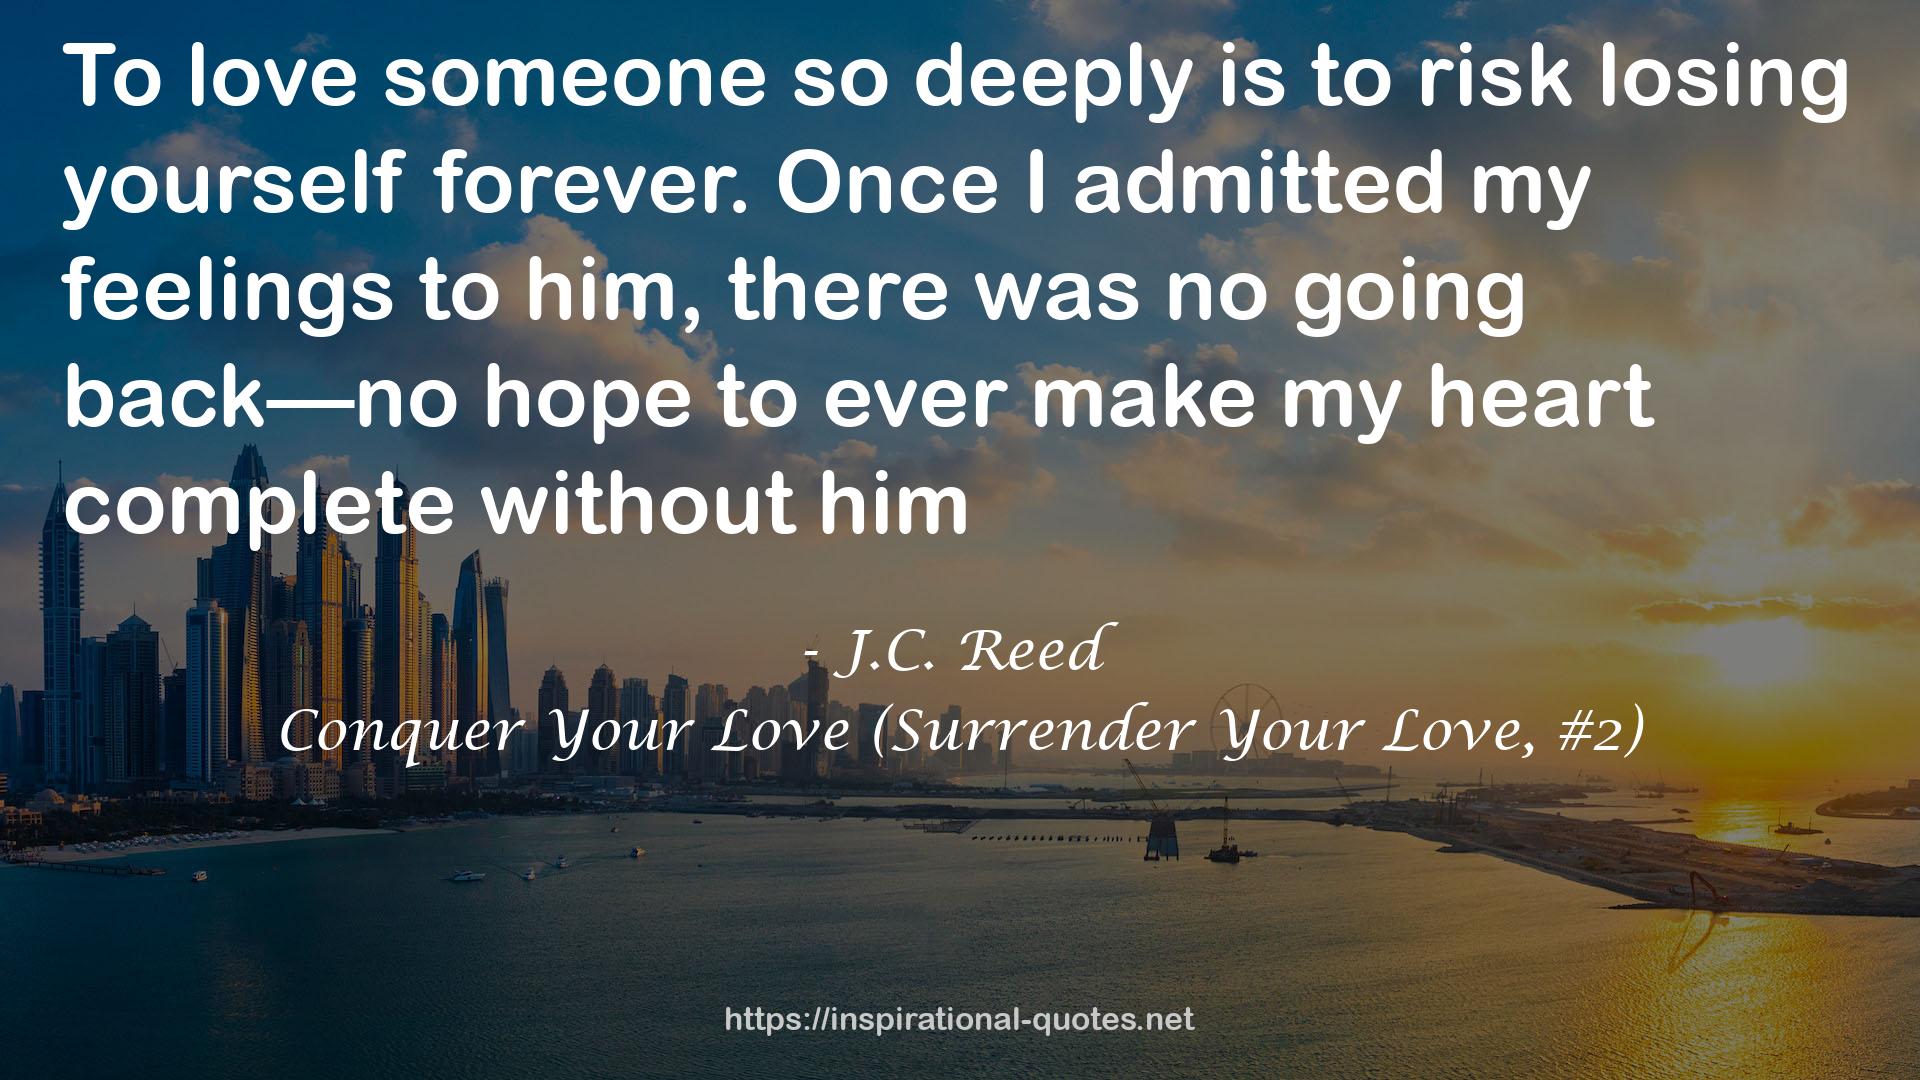 Conquer Your Love (Surrender Your Love, #2) QUOTES